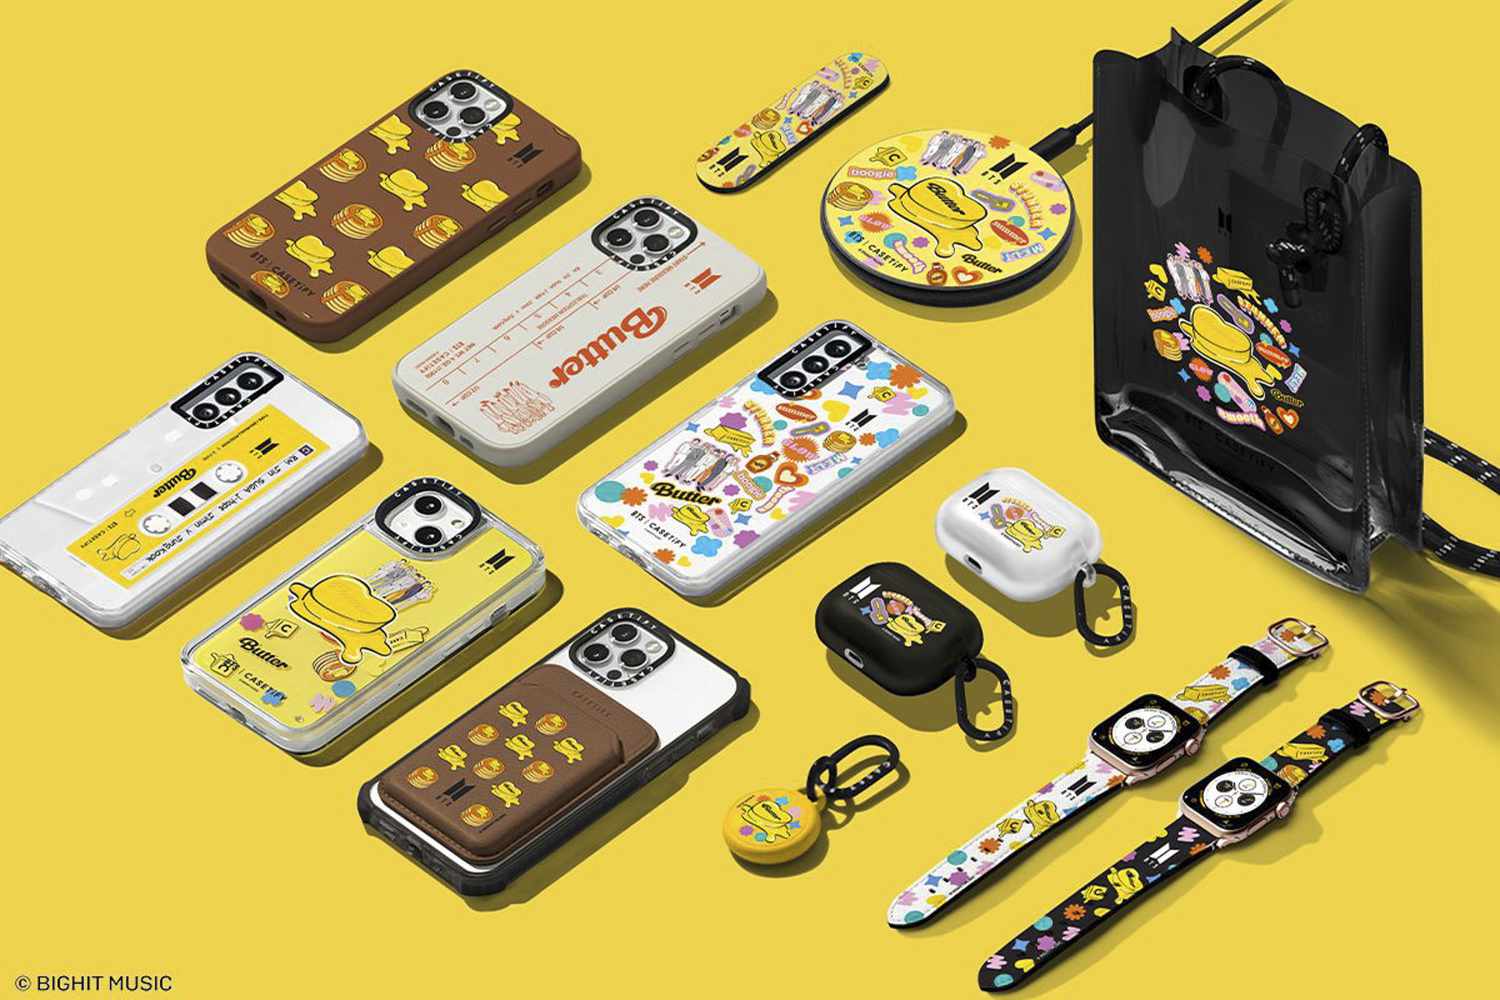 New BTS 'Butter' phone cases are available on Casetify now | EW.com